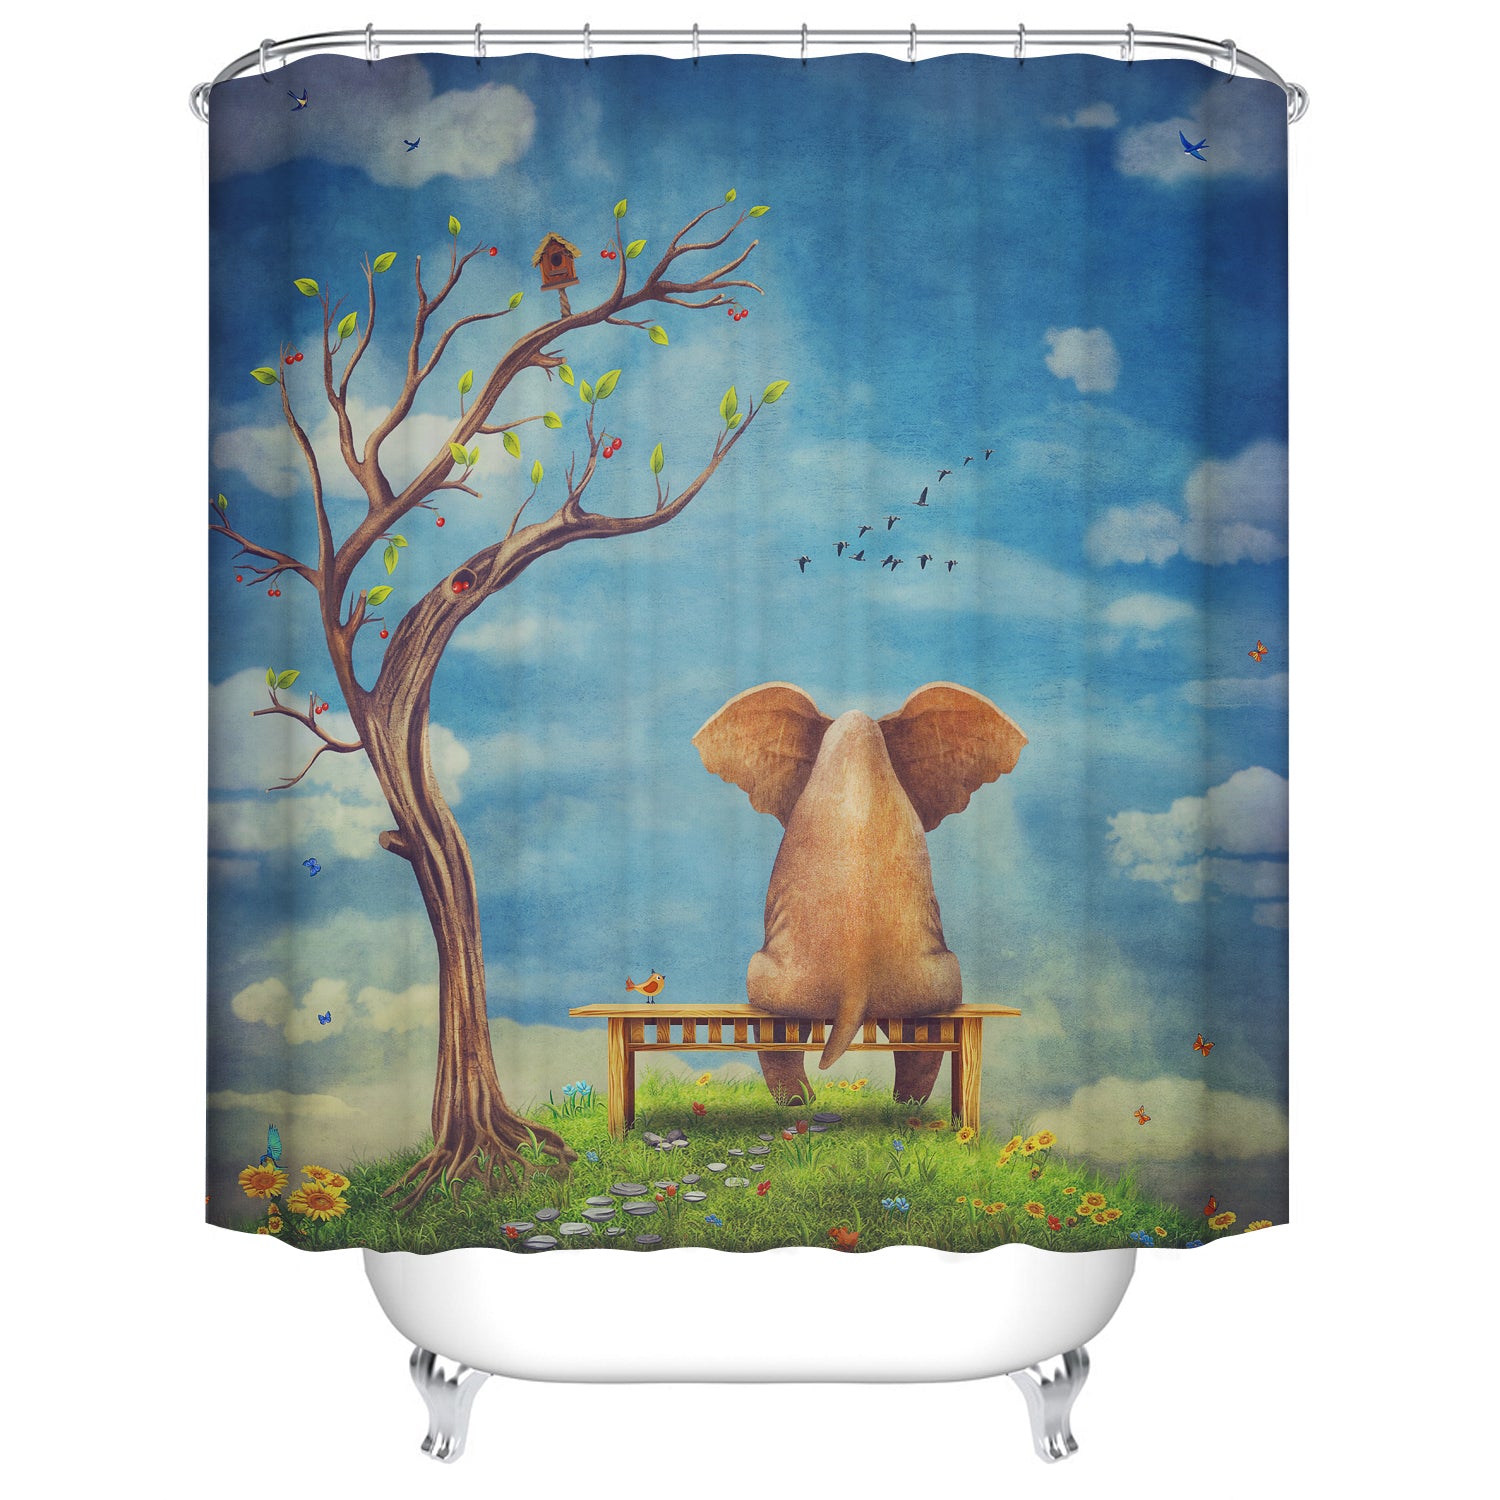 Spring Season Grass with Tree Sitting on Bench with Birds Lovely Elephant Shower Curtain